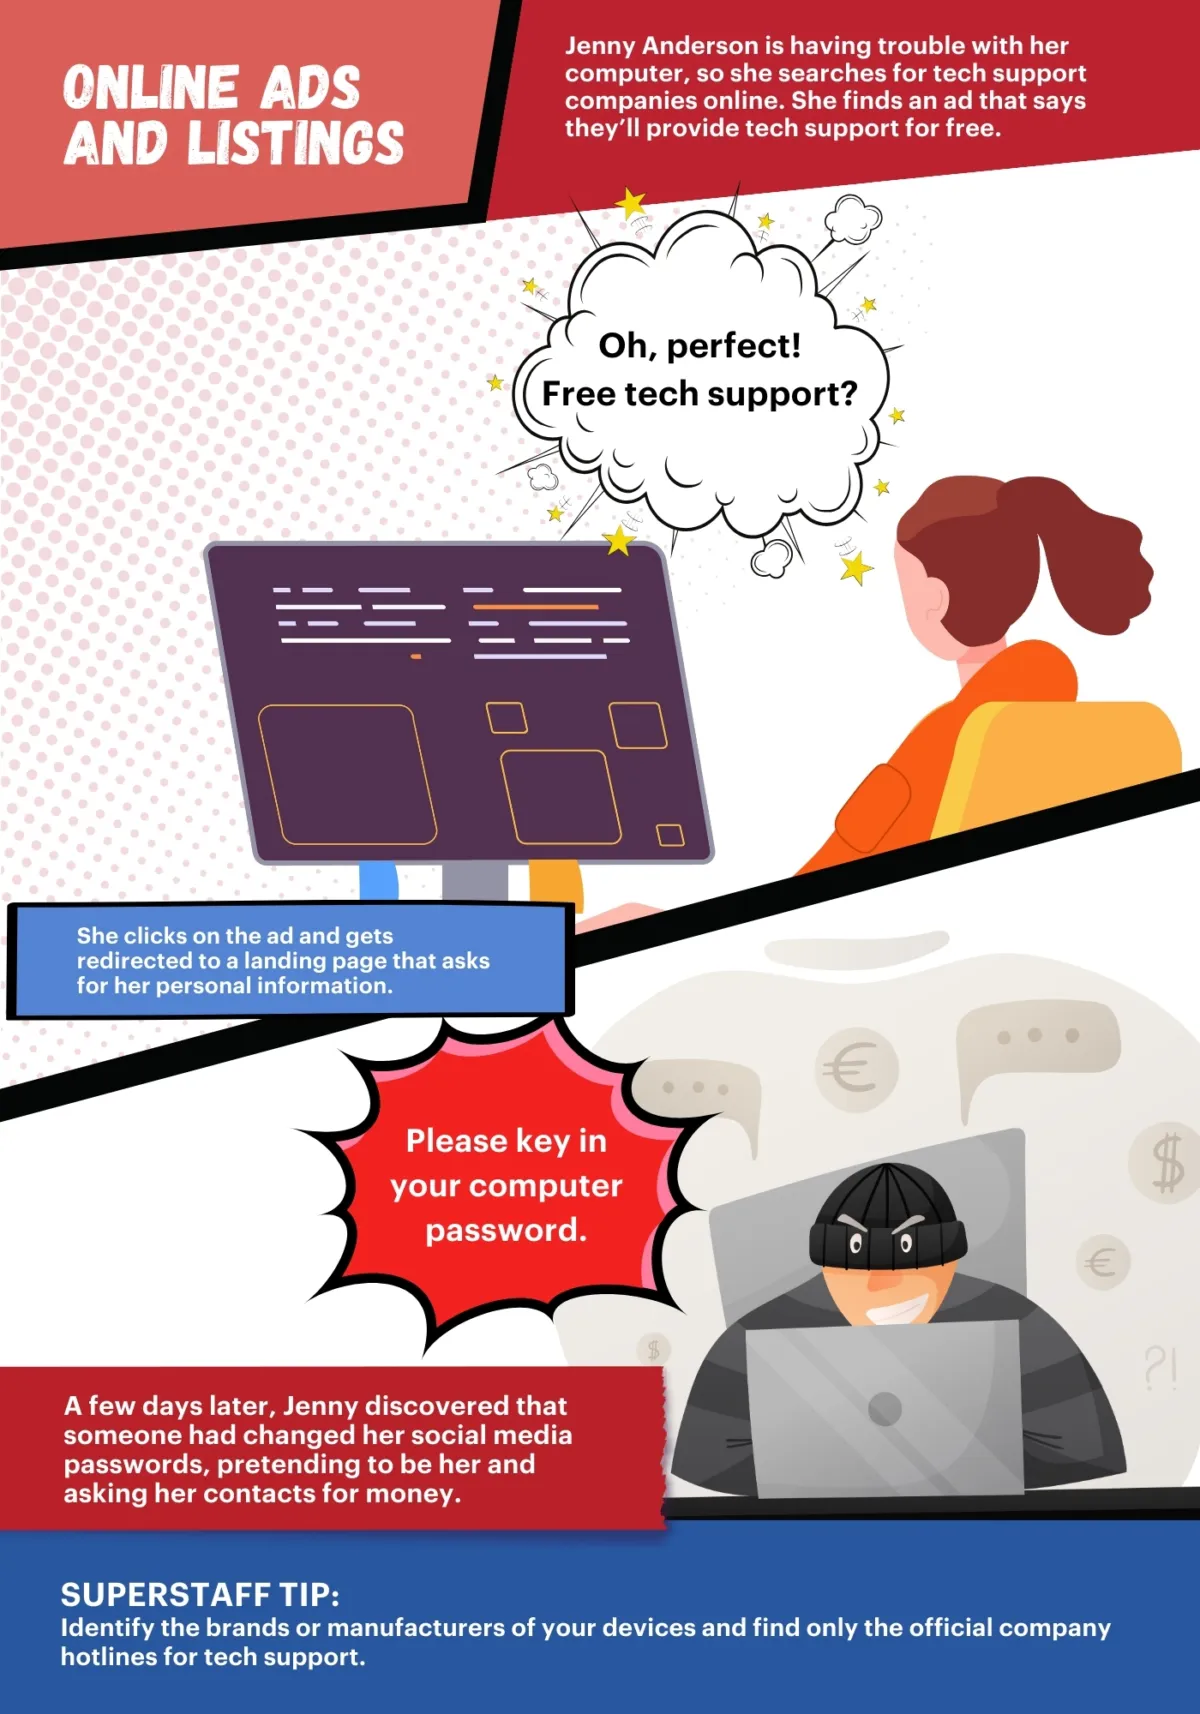 A comic strip shows how scammers use online ad listings to commit tech support fraud.